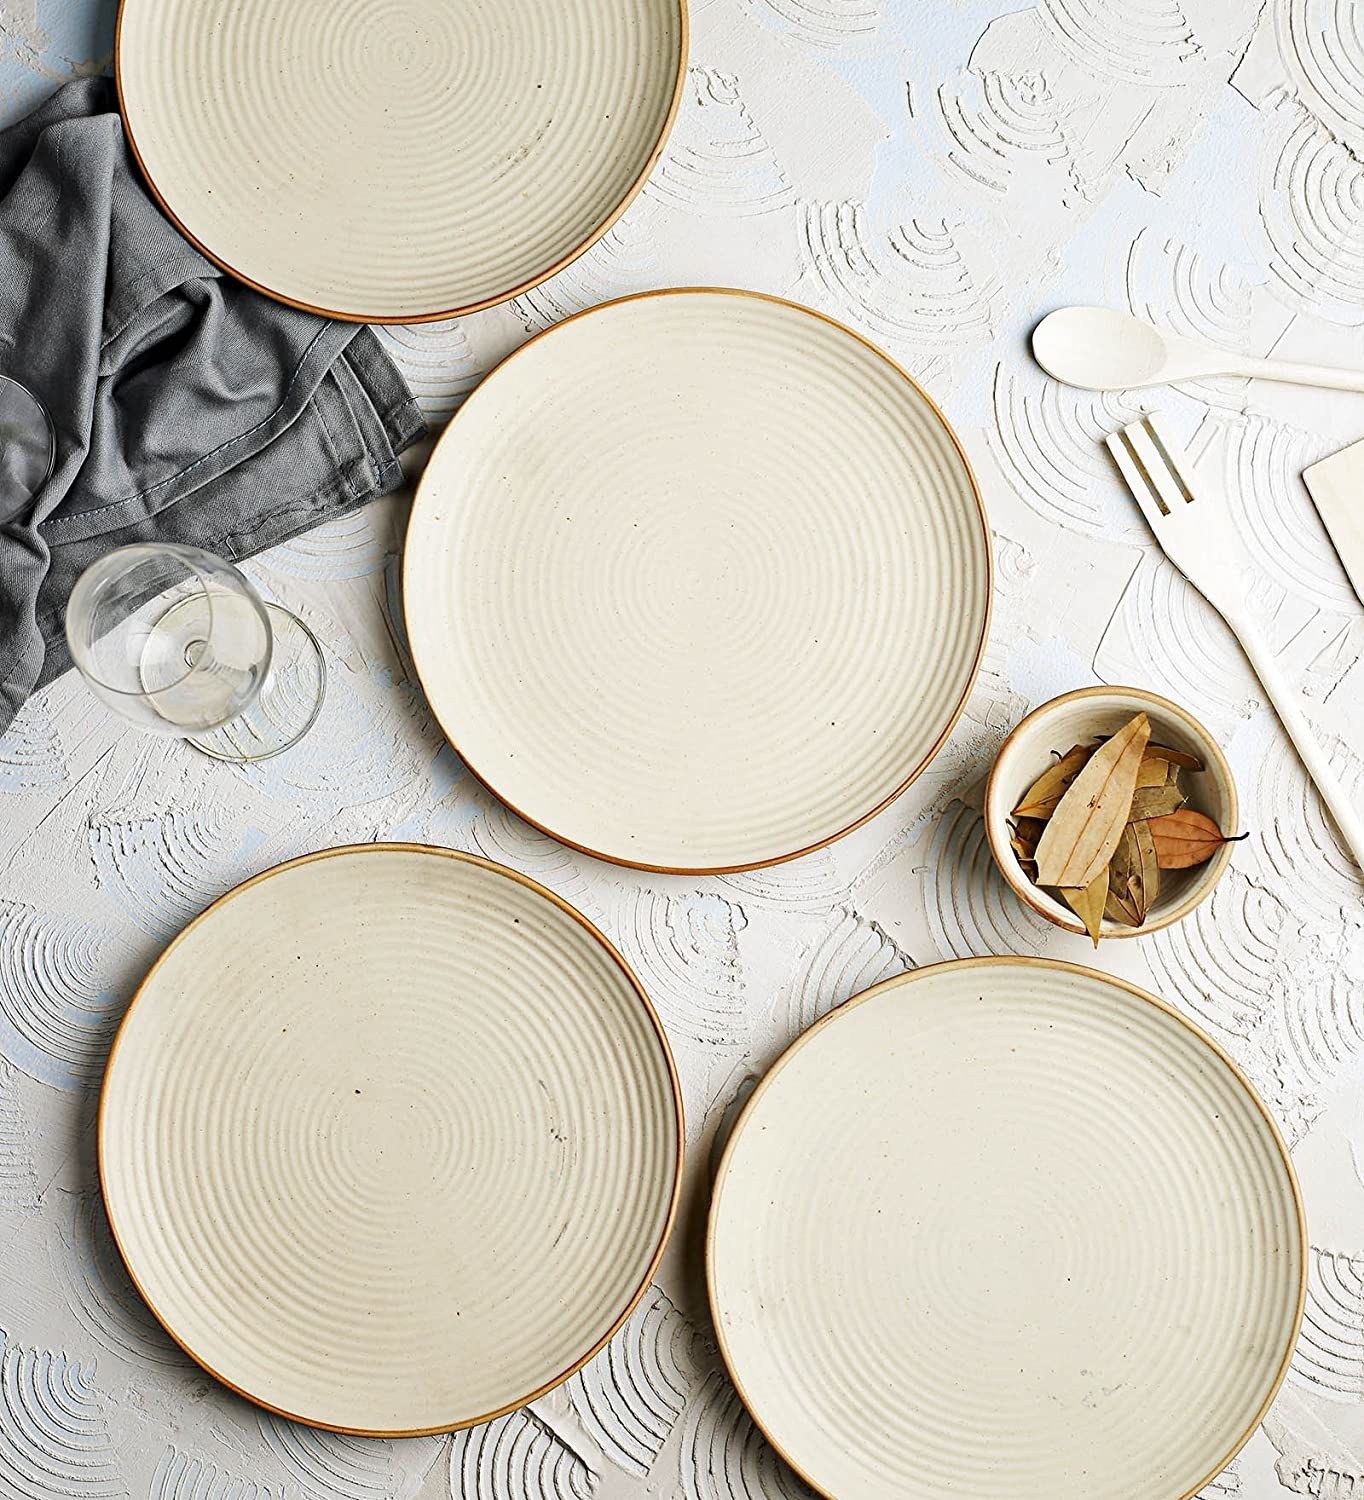 A set of plates with golden edges